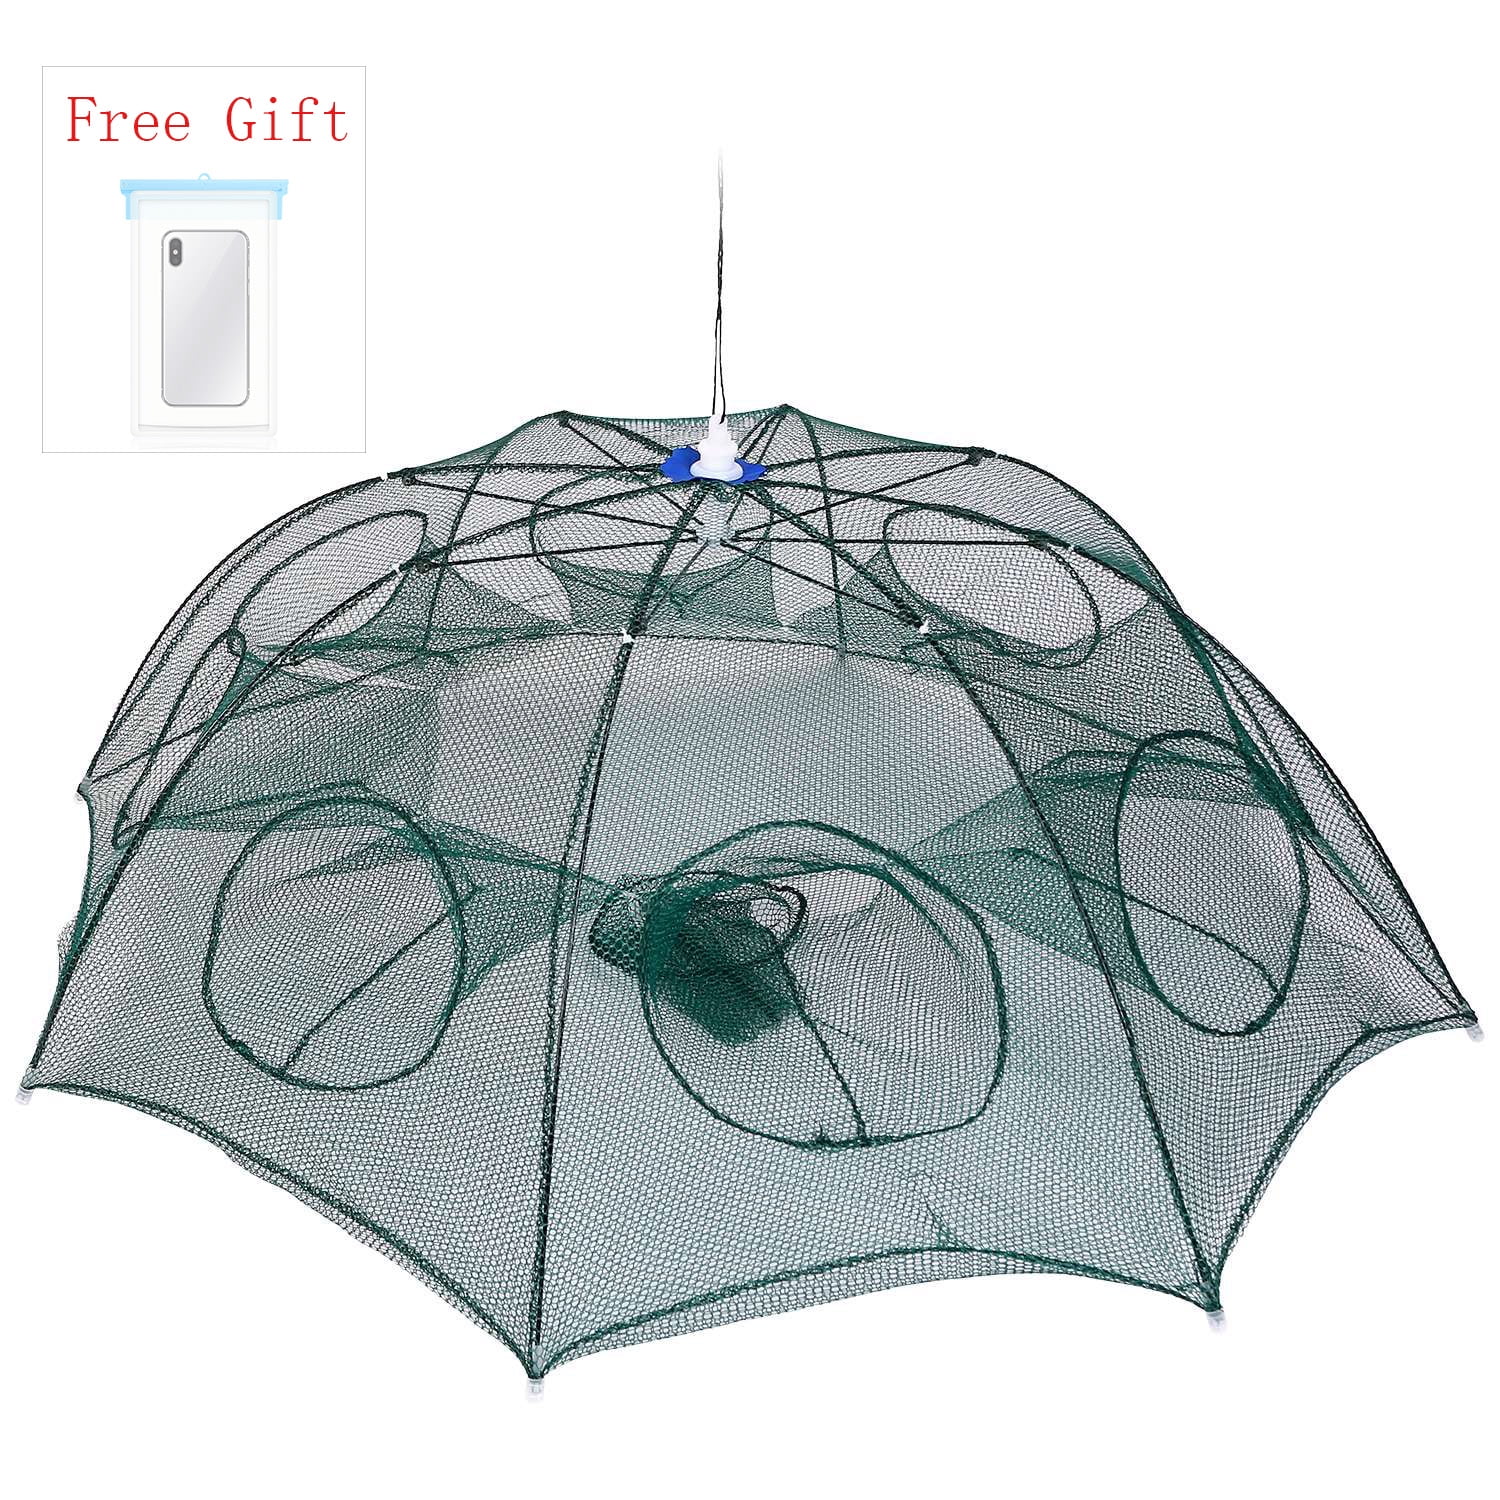 Foldable Fishing Bait Trap Double Layer Net, Portable Cast Net Dip Cage  with Extender Rod for Fish Minnow Crab Crawfish Crayfish Crawdad Shrimp